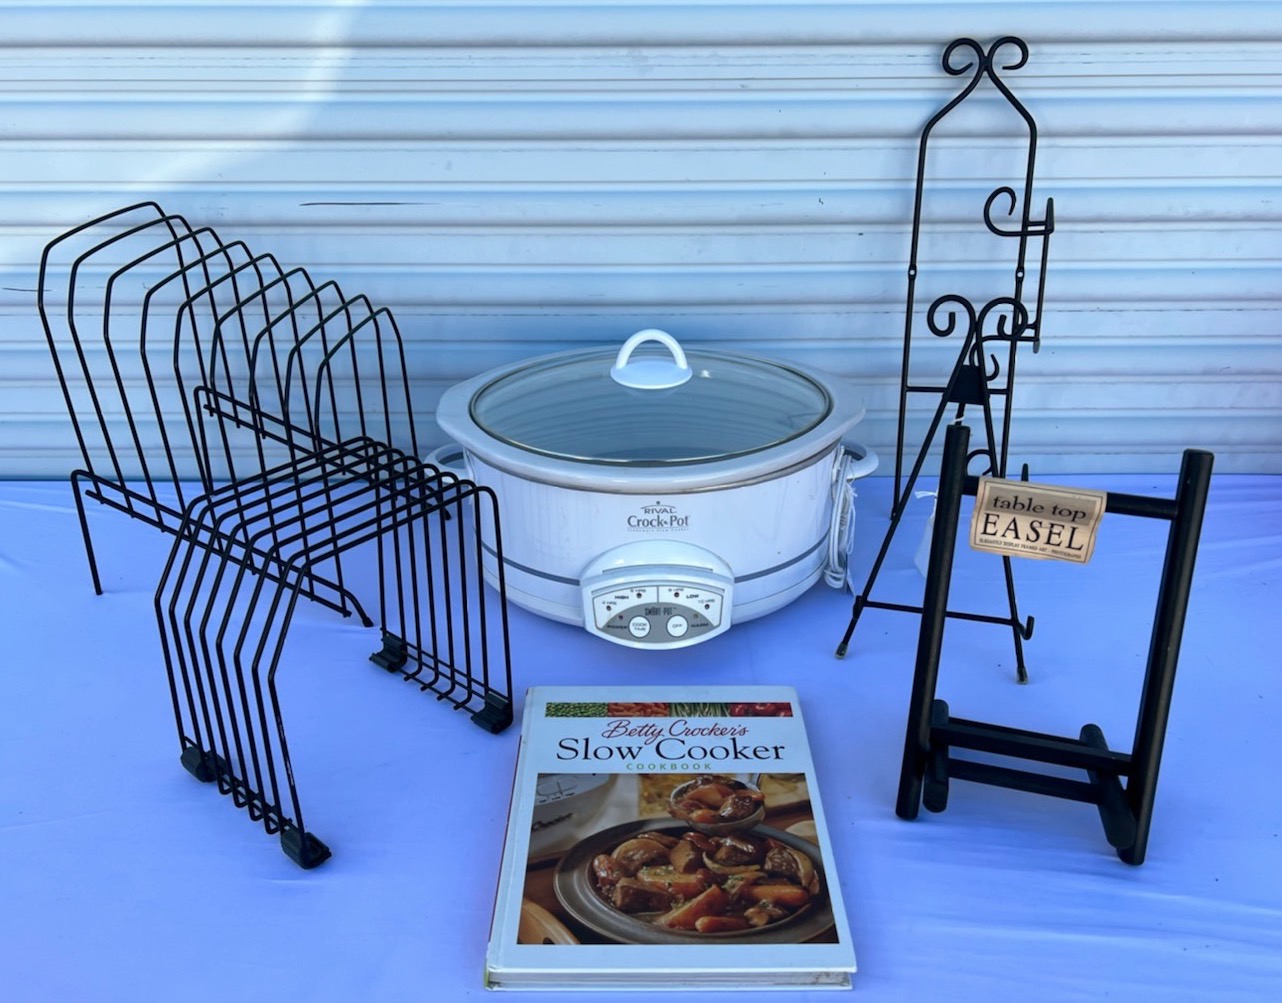 Rival Crockpot, the Incomparable, the Original : Crock Pot Brand Slow  Electric Stonewear Cooker, Server, Cookbook